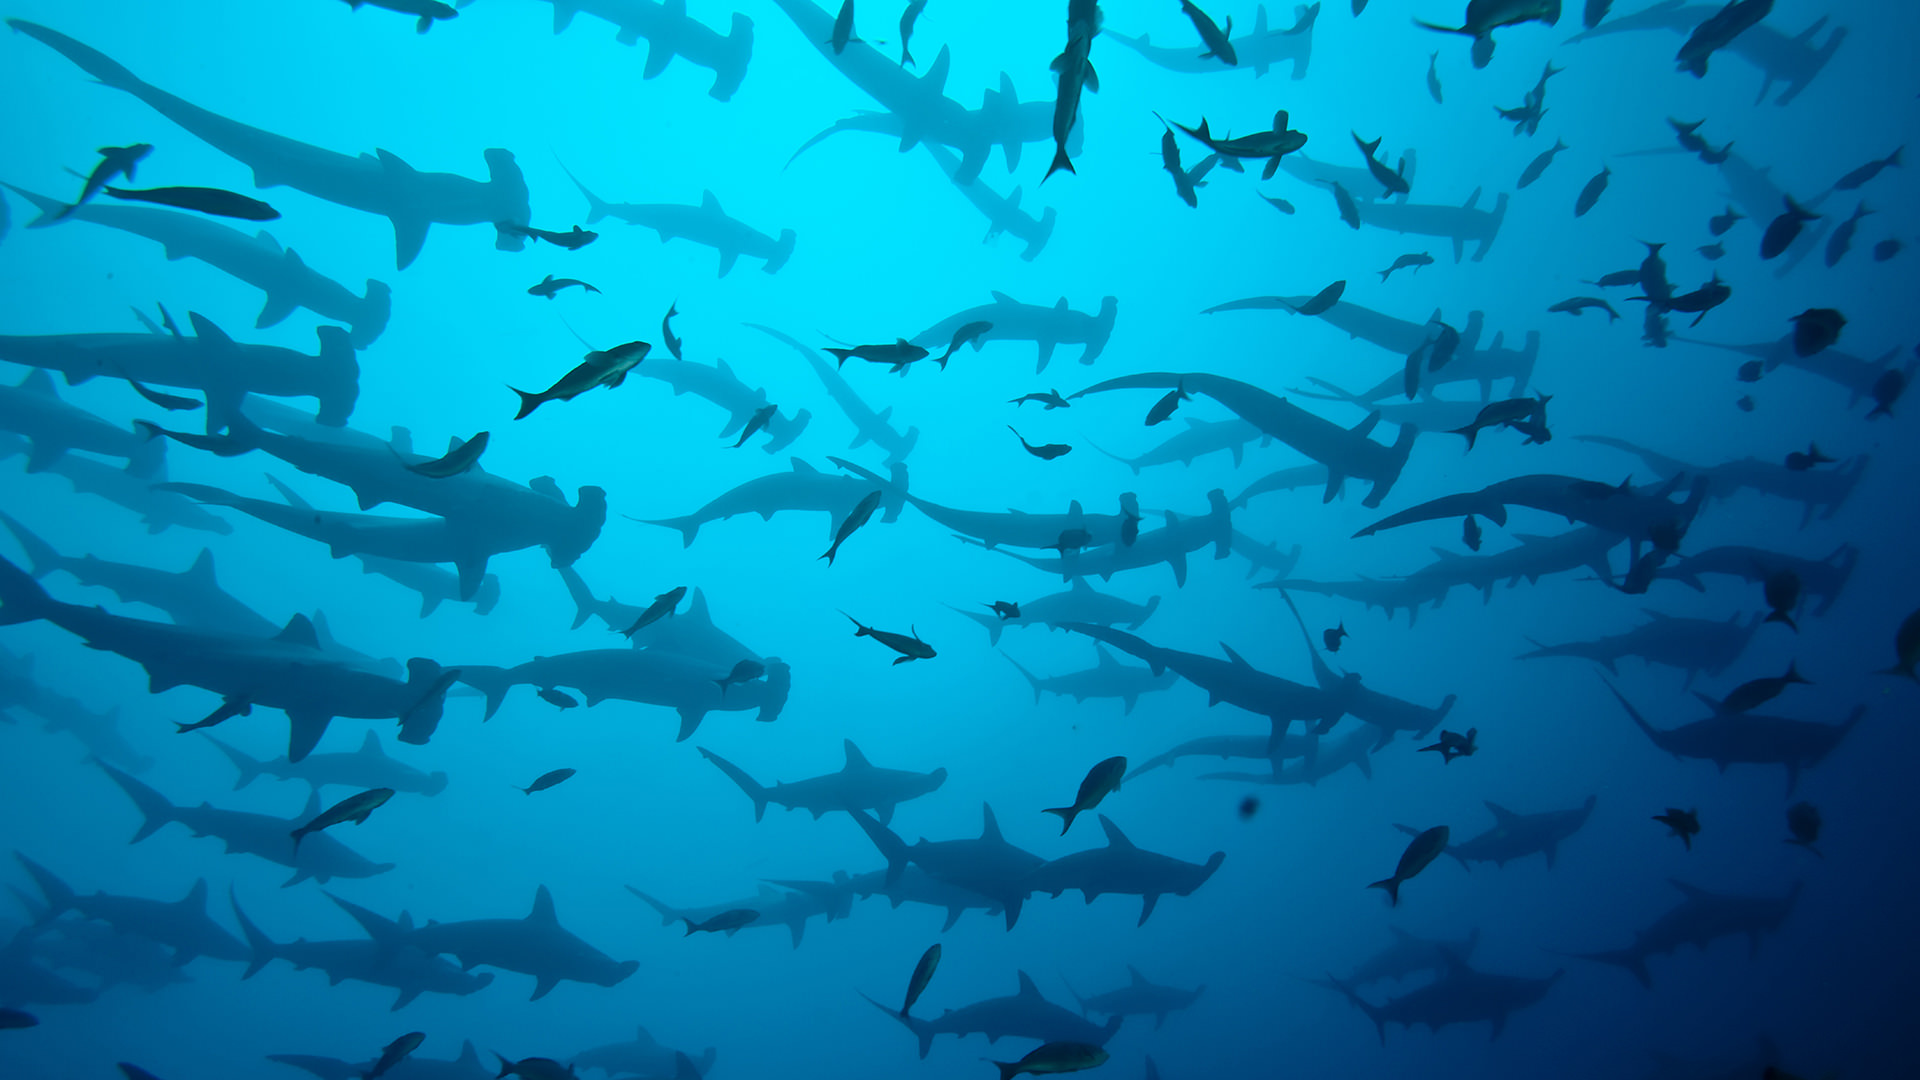 Hundreds of hammerhead sharks silhouetted below the ocean surface at Cocos Island, one of the world's top scuba destinations